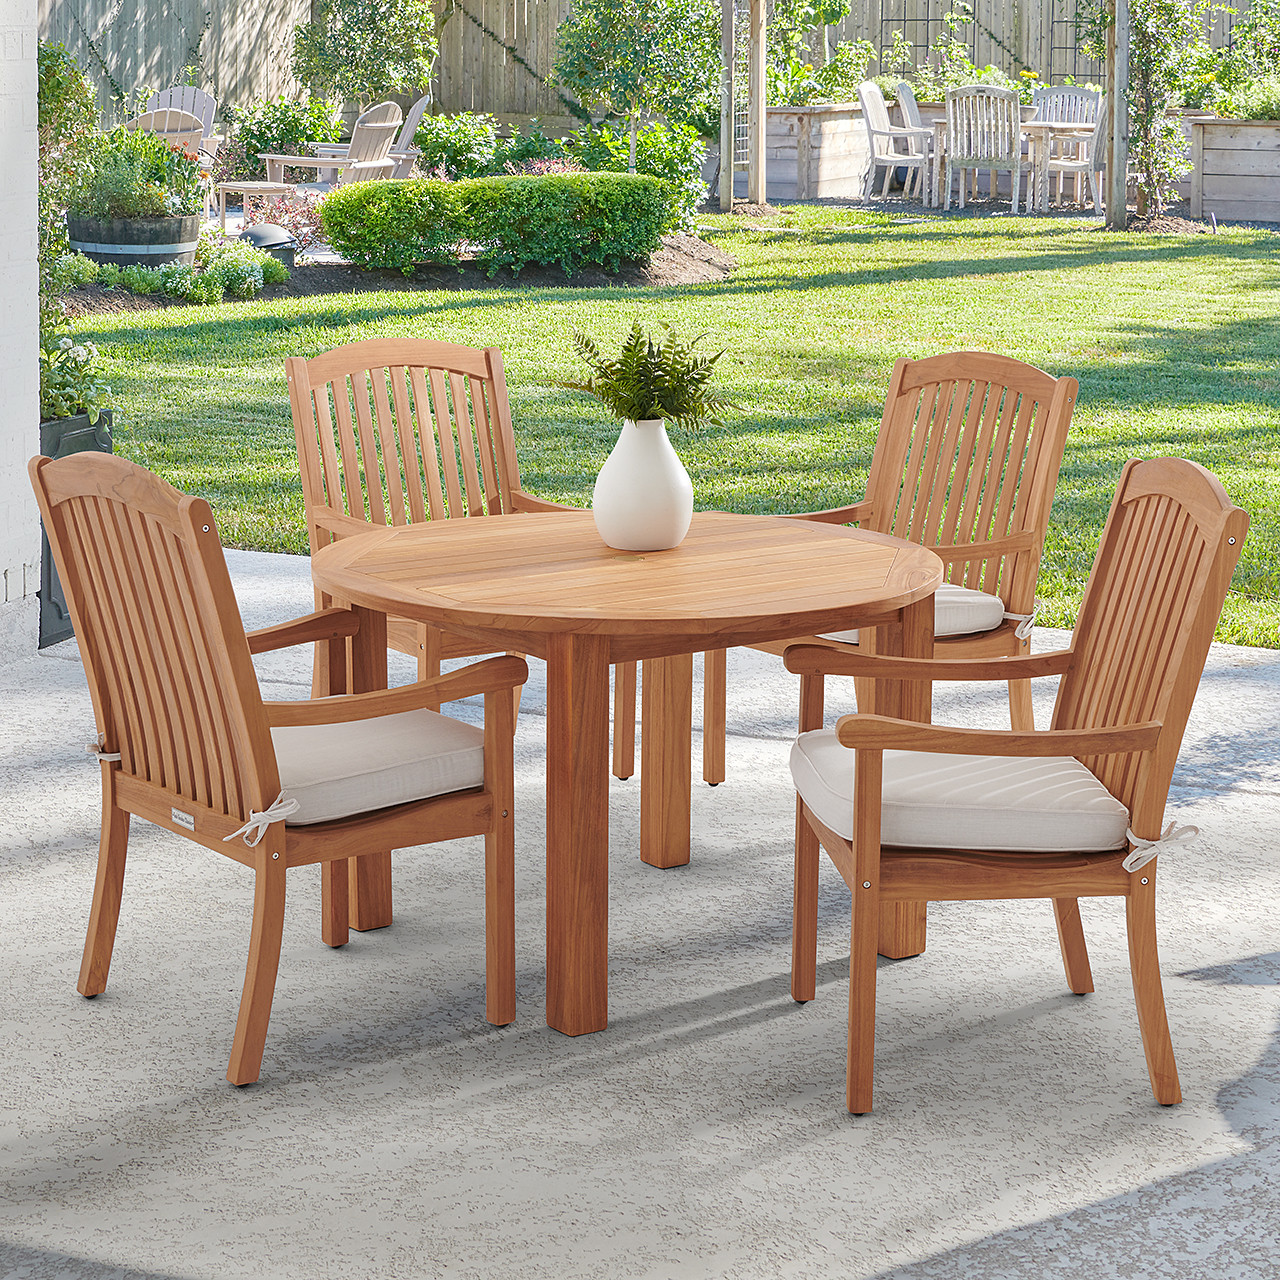 Eastchester Teak with Cushions 5 Pc. Dining Set + Oxford 48 in. D Table